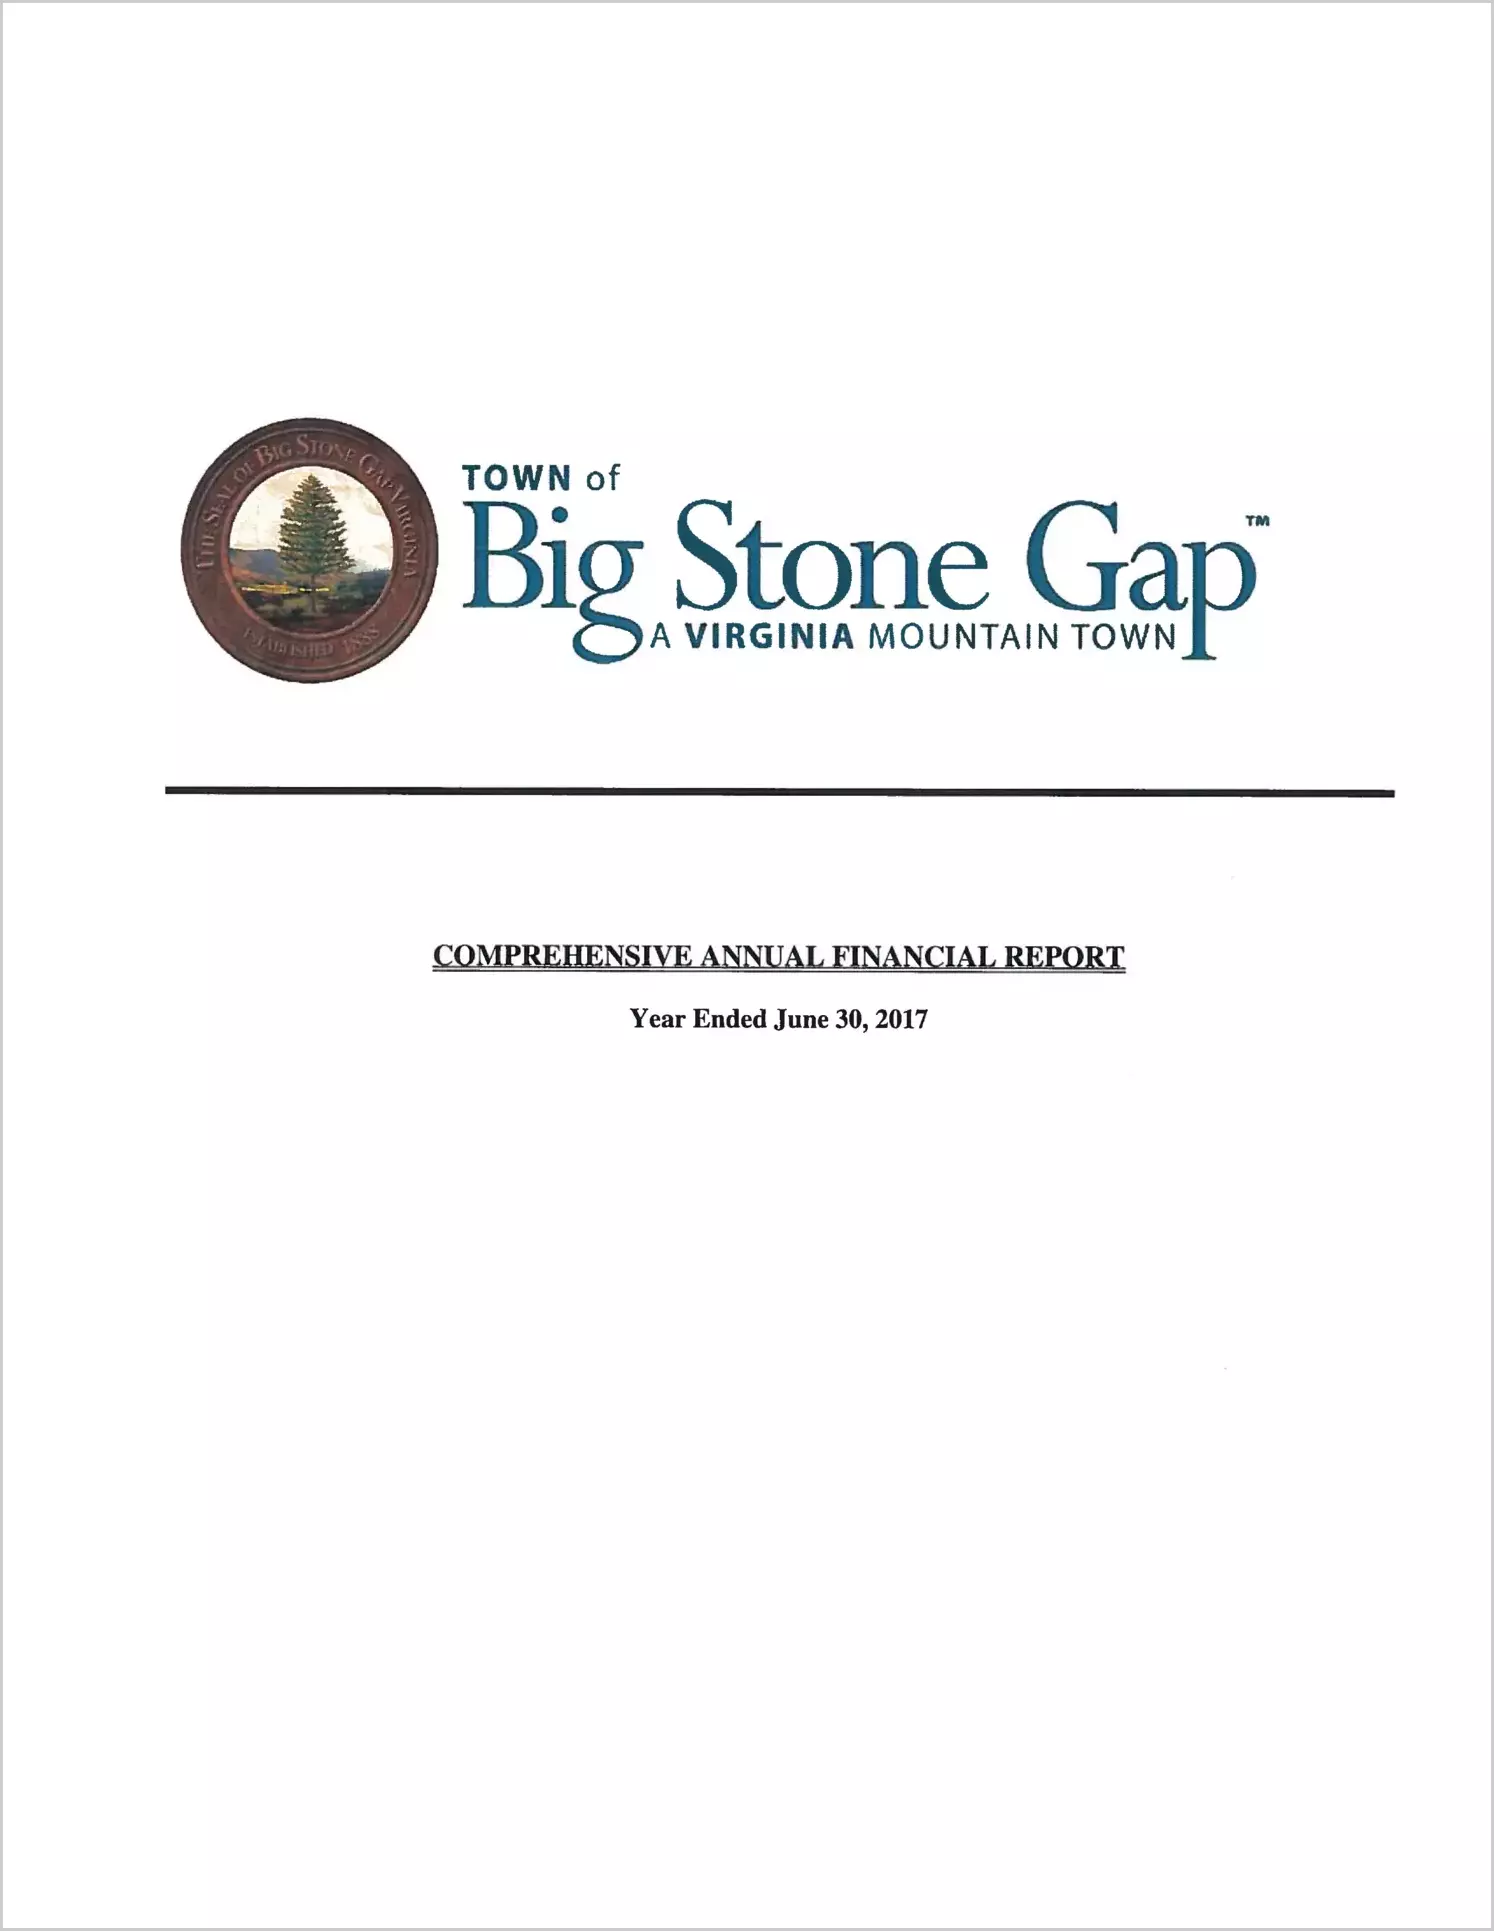 2017 Annual Financial Report for Town of Big Stone Gap